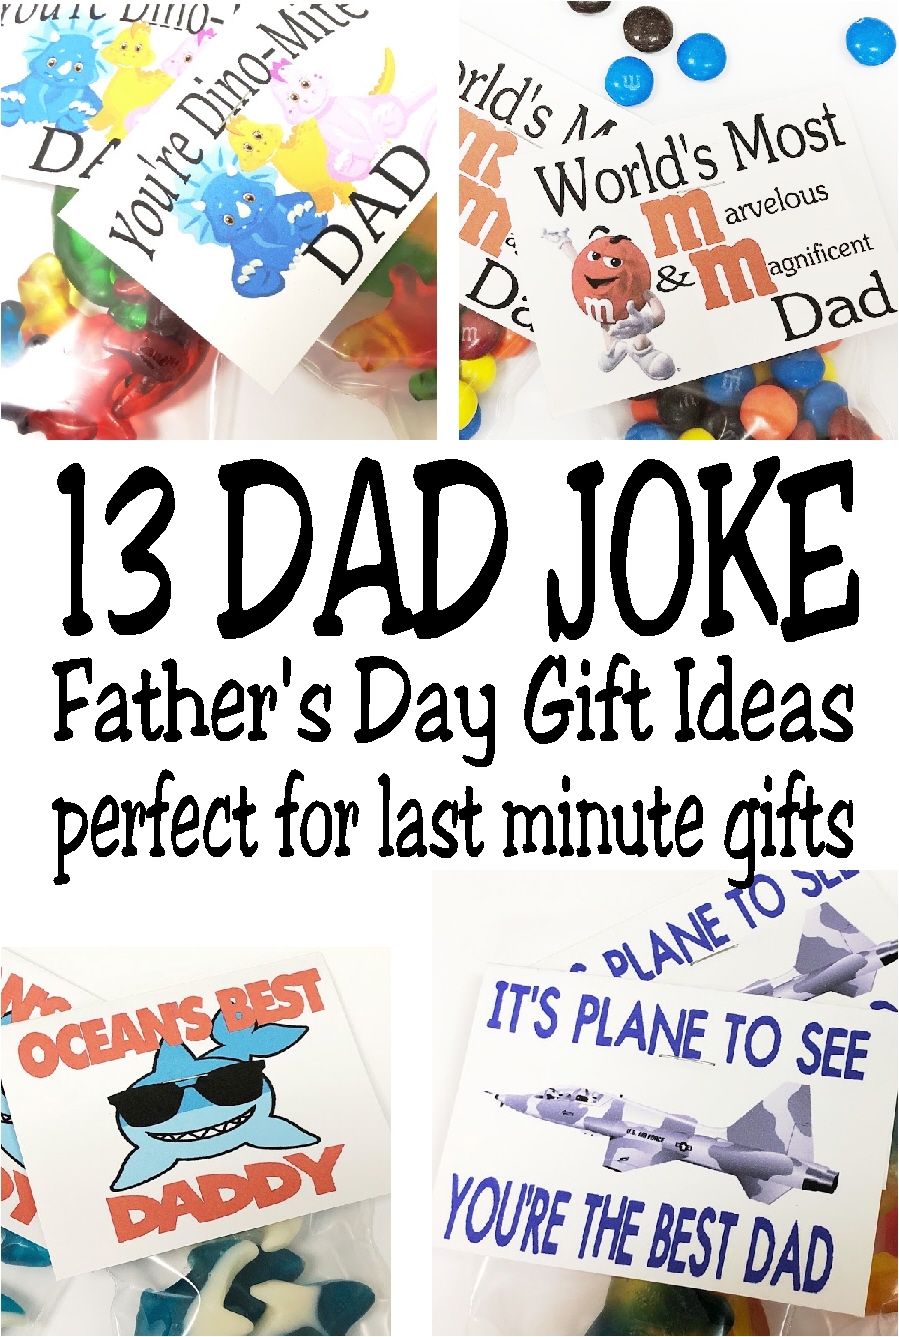 Last Minute Father's Day Gift Guide 